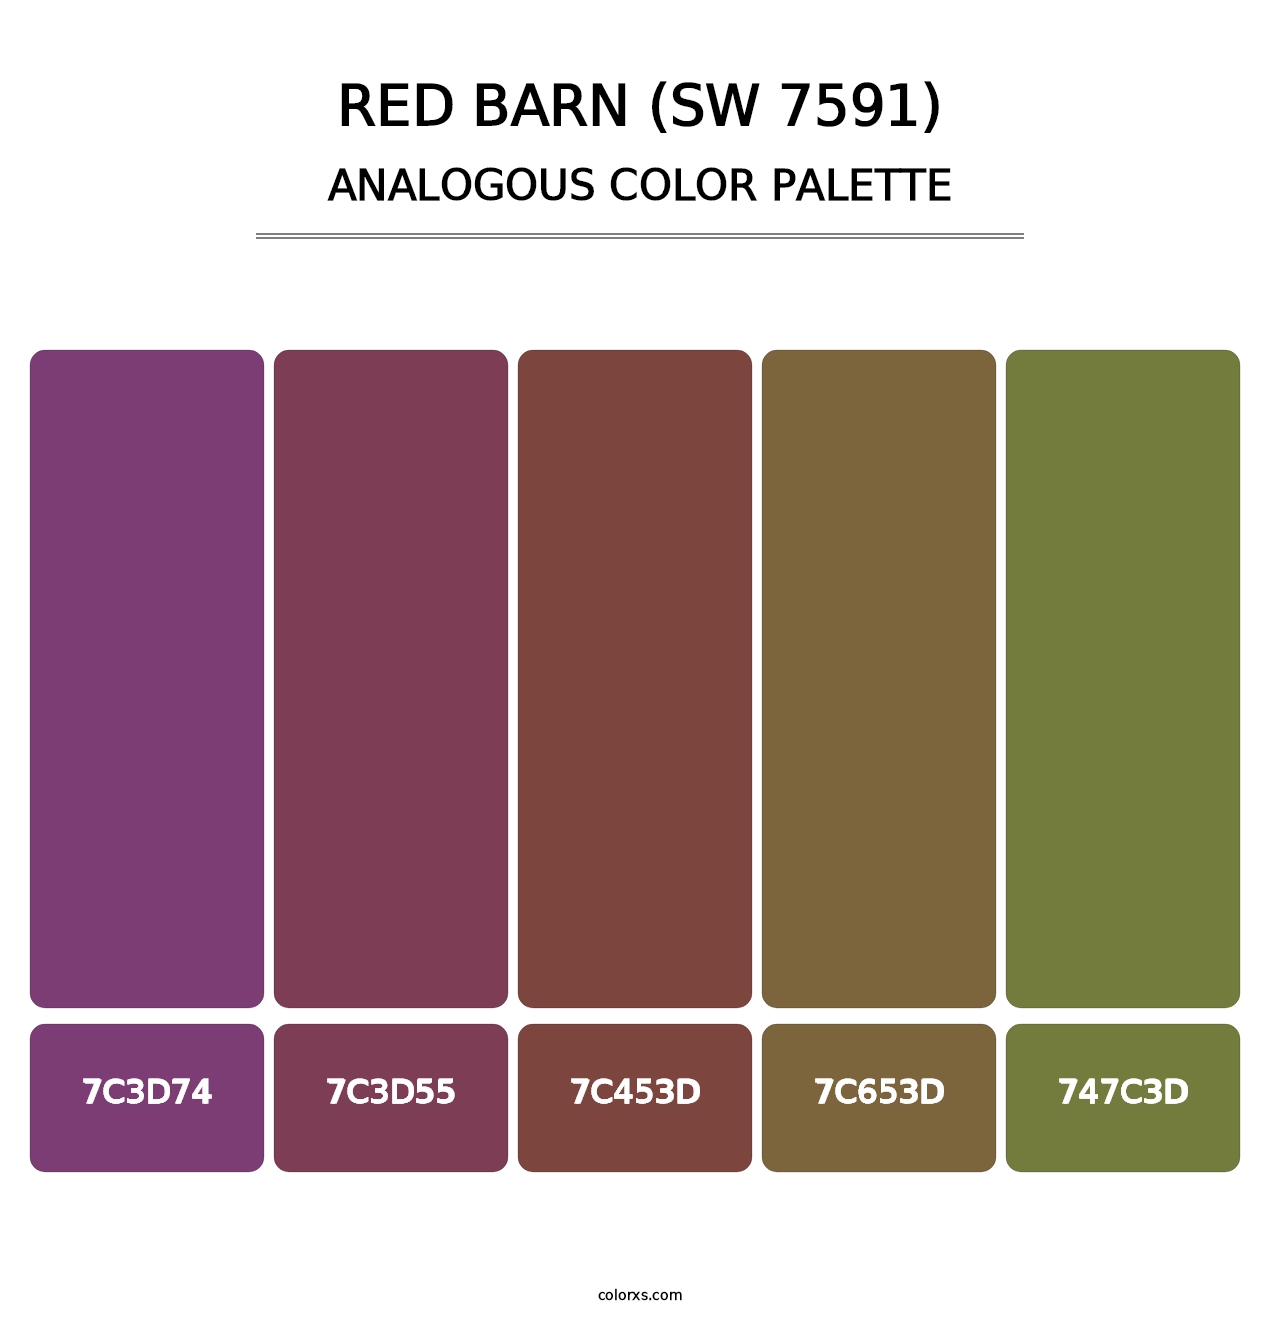 Red Barn (SW 7591) - Analogous Color Palette